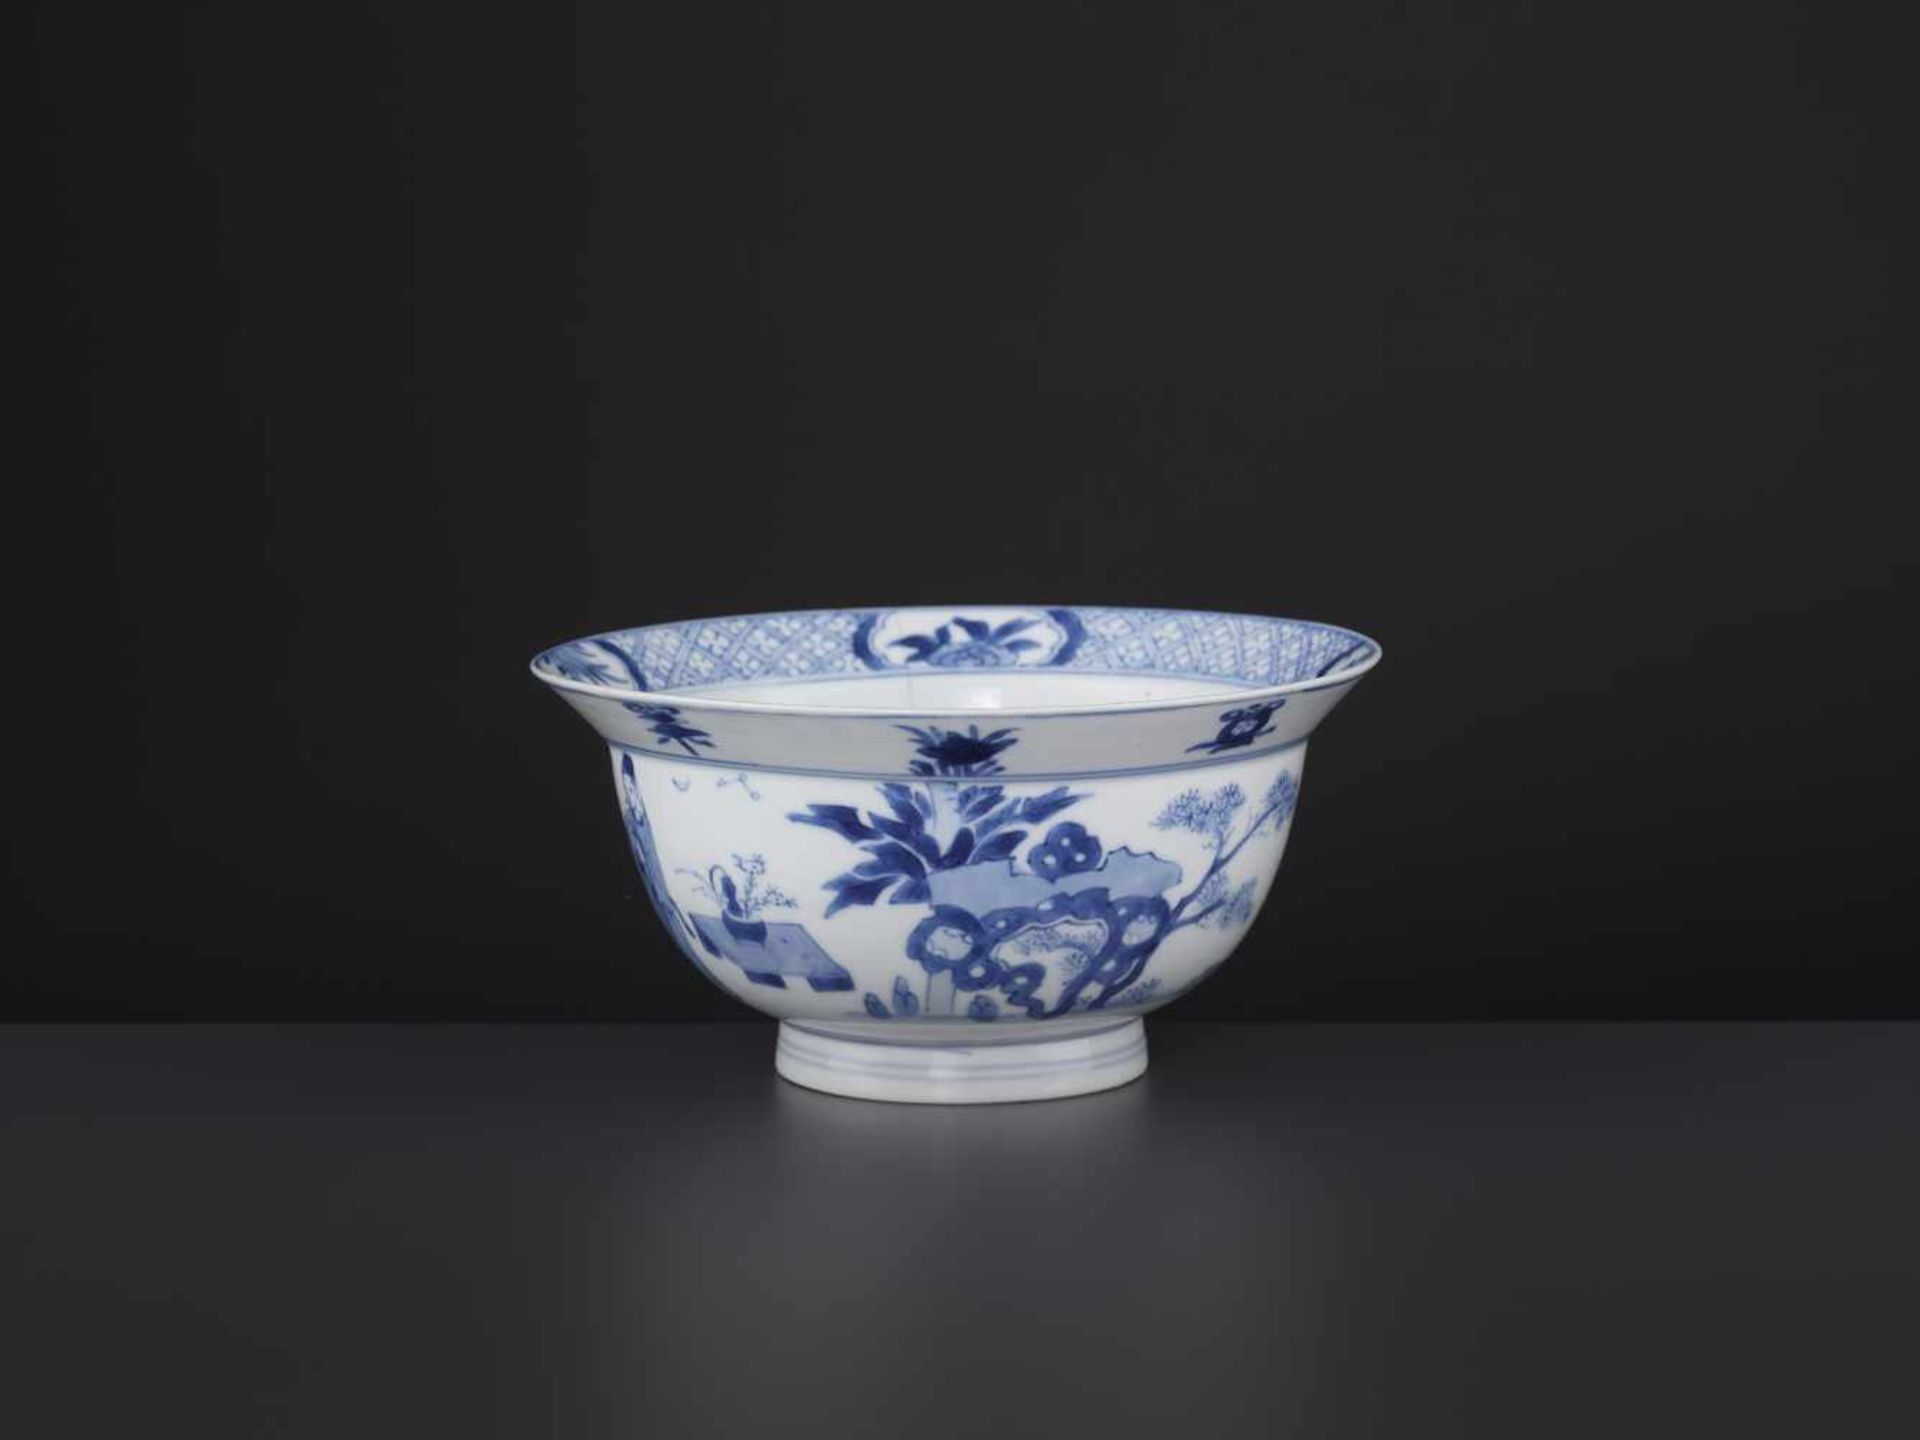 A KANGXI BLUE & WHITE KLAPMUTS BOWLChina, 1662-1722. Delicately painted with scenes from ‘Romance of - Image 2 of 8